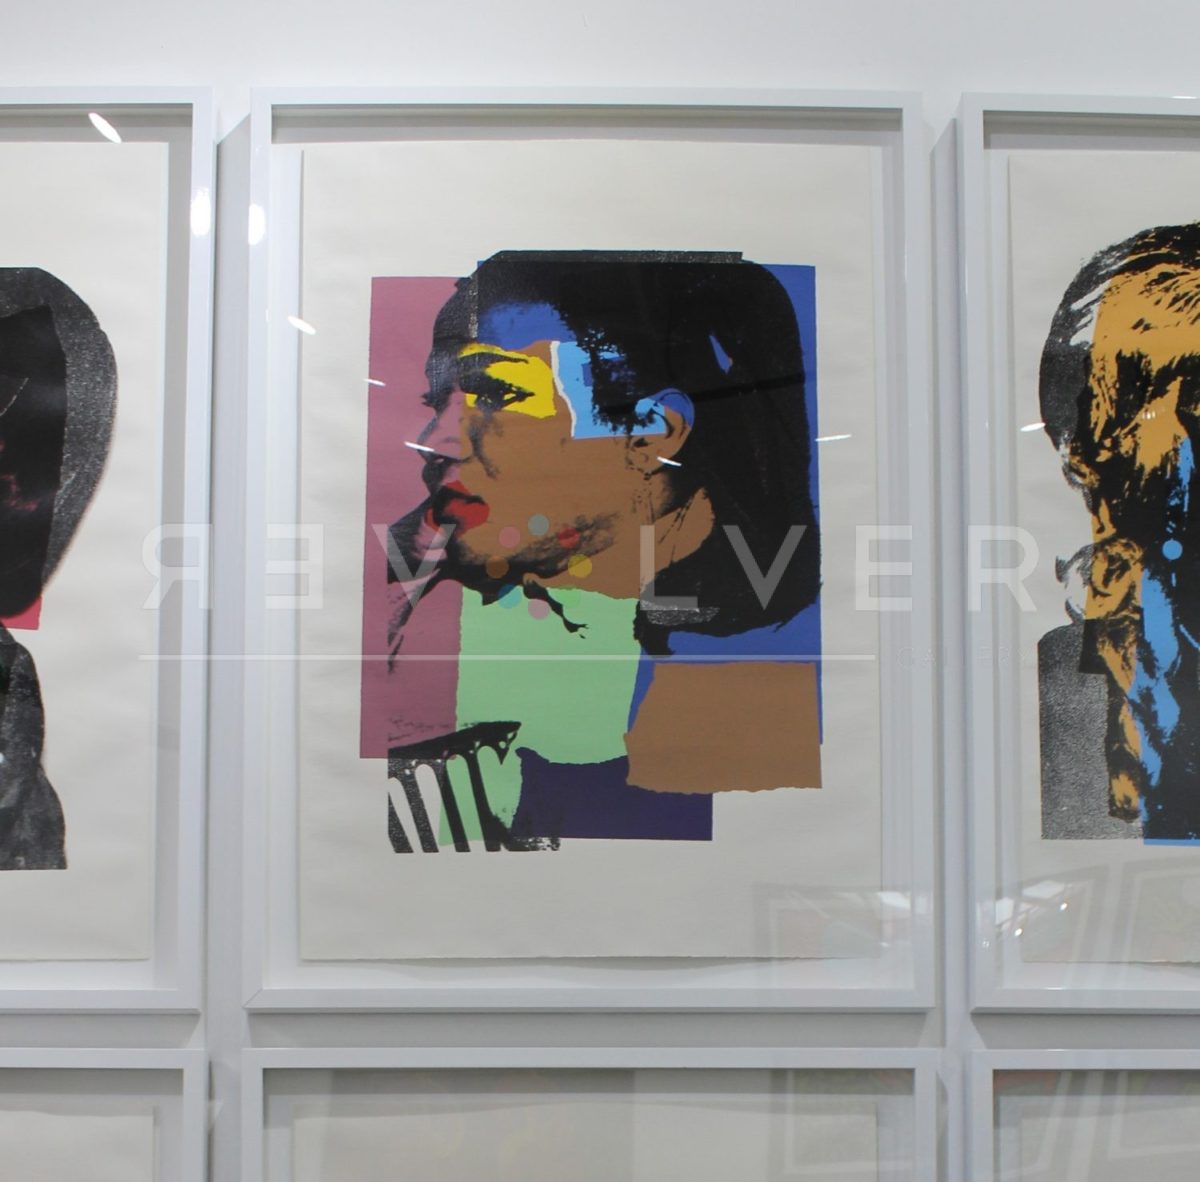 Andy Warhol Ladies and Gentlemen 129 framed and hanging on the gallery wall alongside other prints from the series.